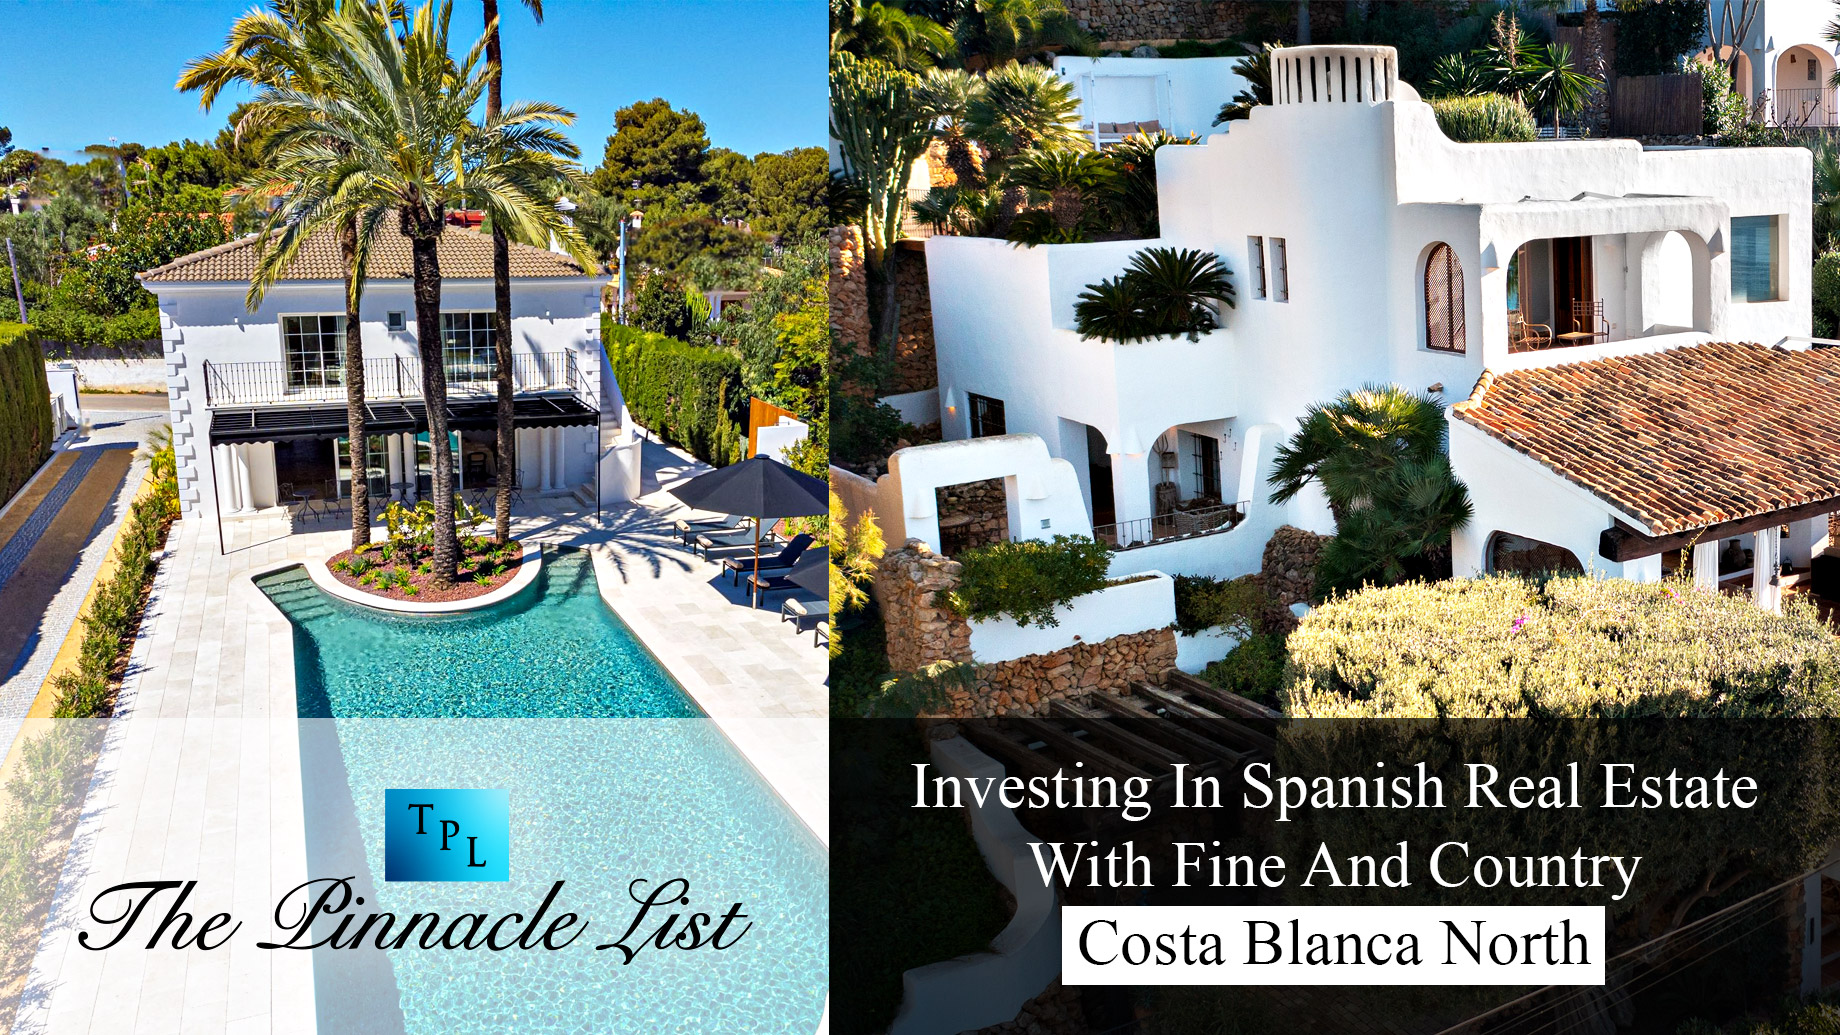 Investing In Spanish Real Estate With Fine And Country Costa Blanca North